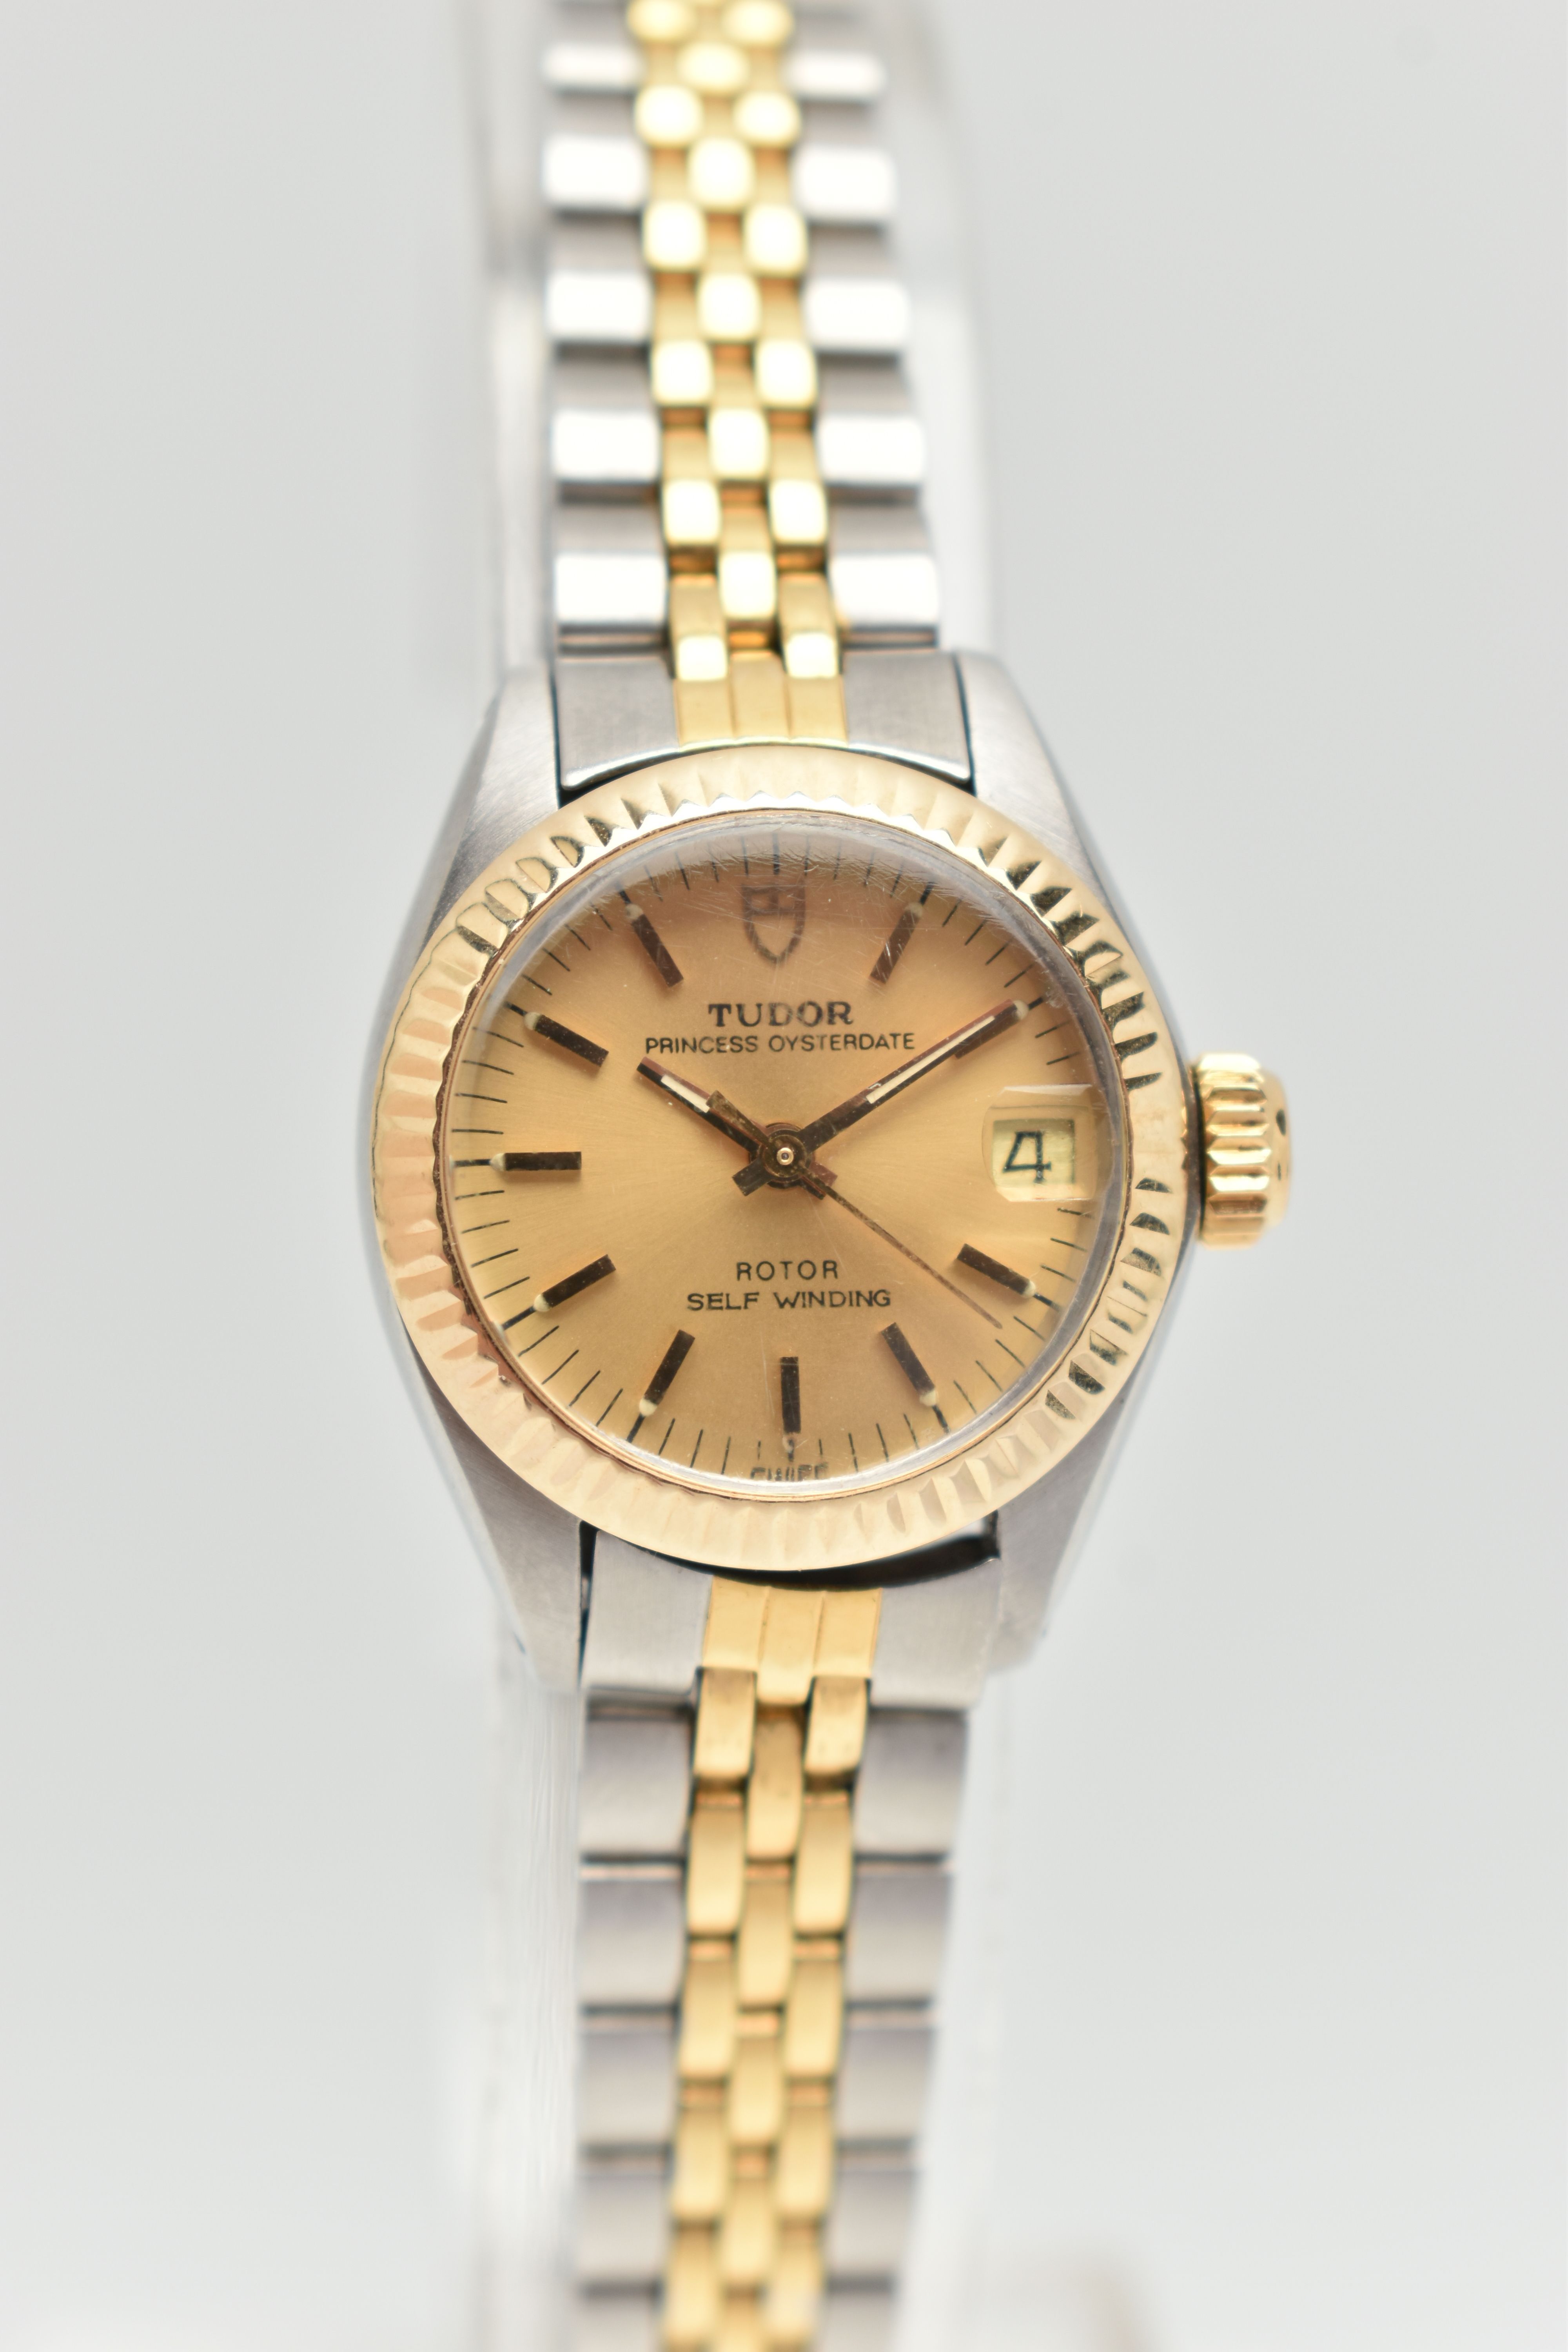 A LADYS 'TUDOR' WRISTWATCH, round gold dial signed 'Tudor Princess Oyster date, Rotor Self Winding',